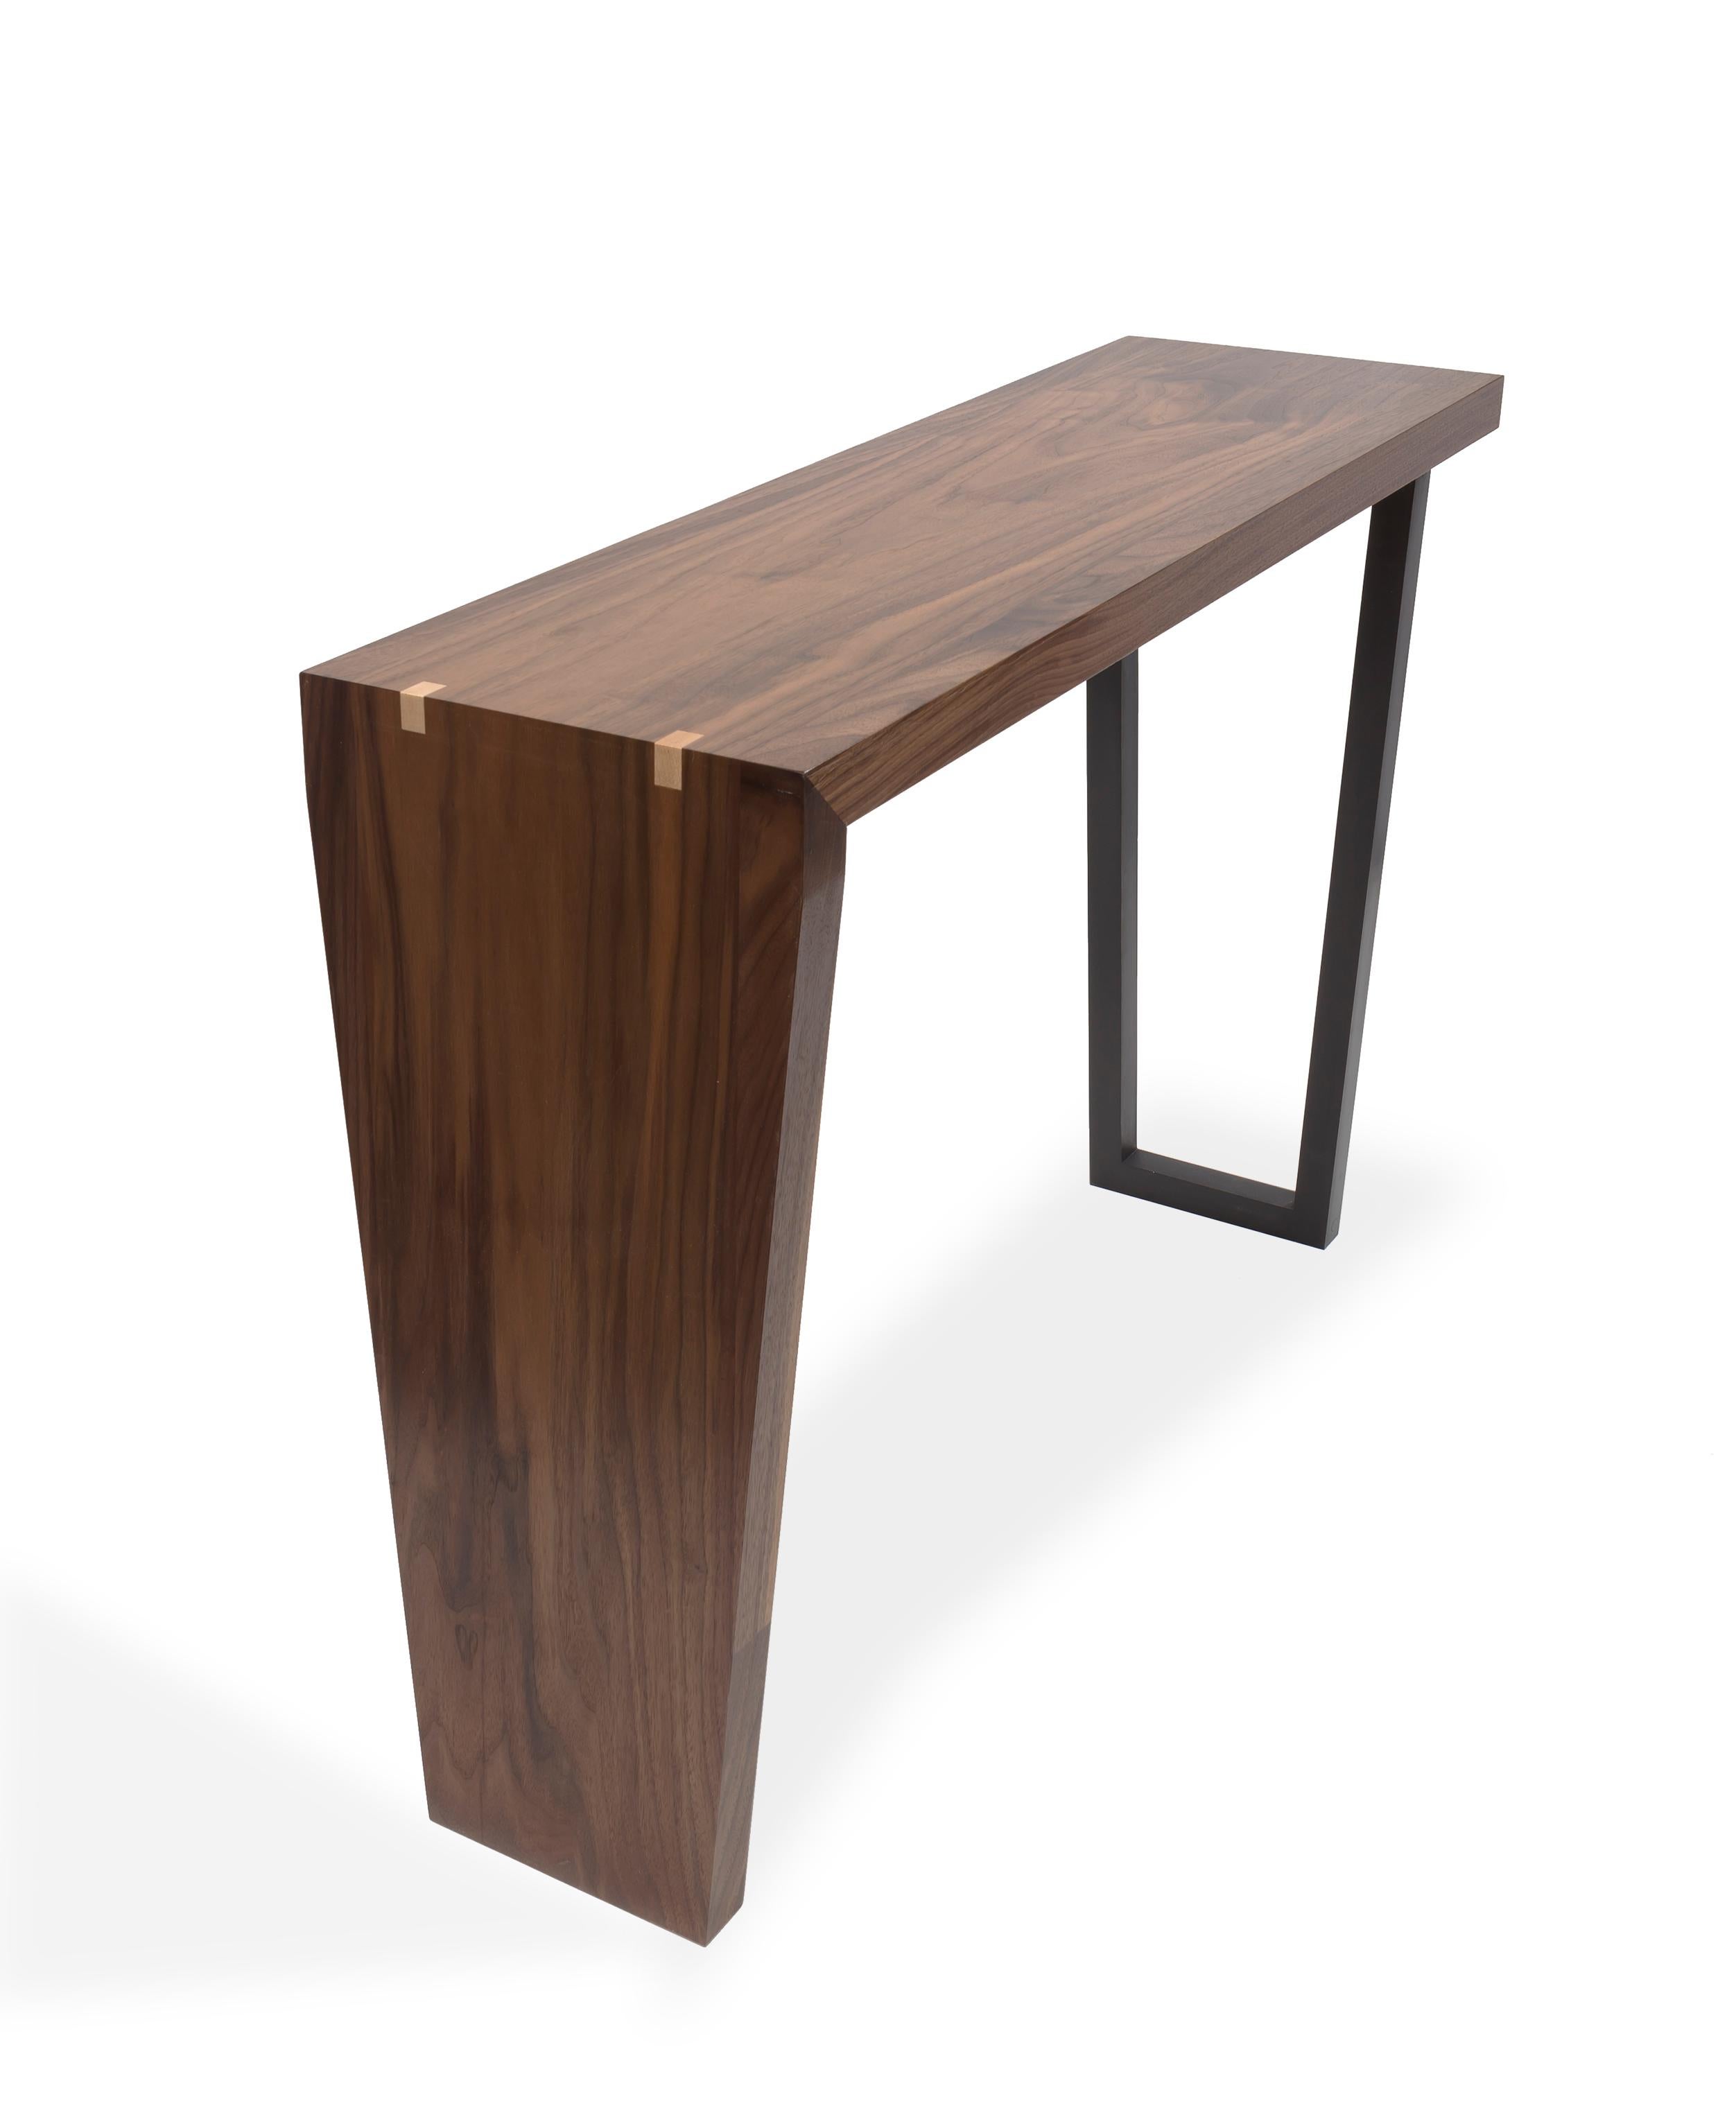 Walnut with teak detail and black lacquer legs.